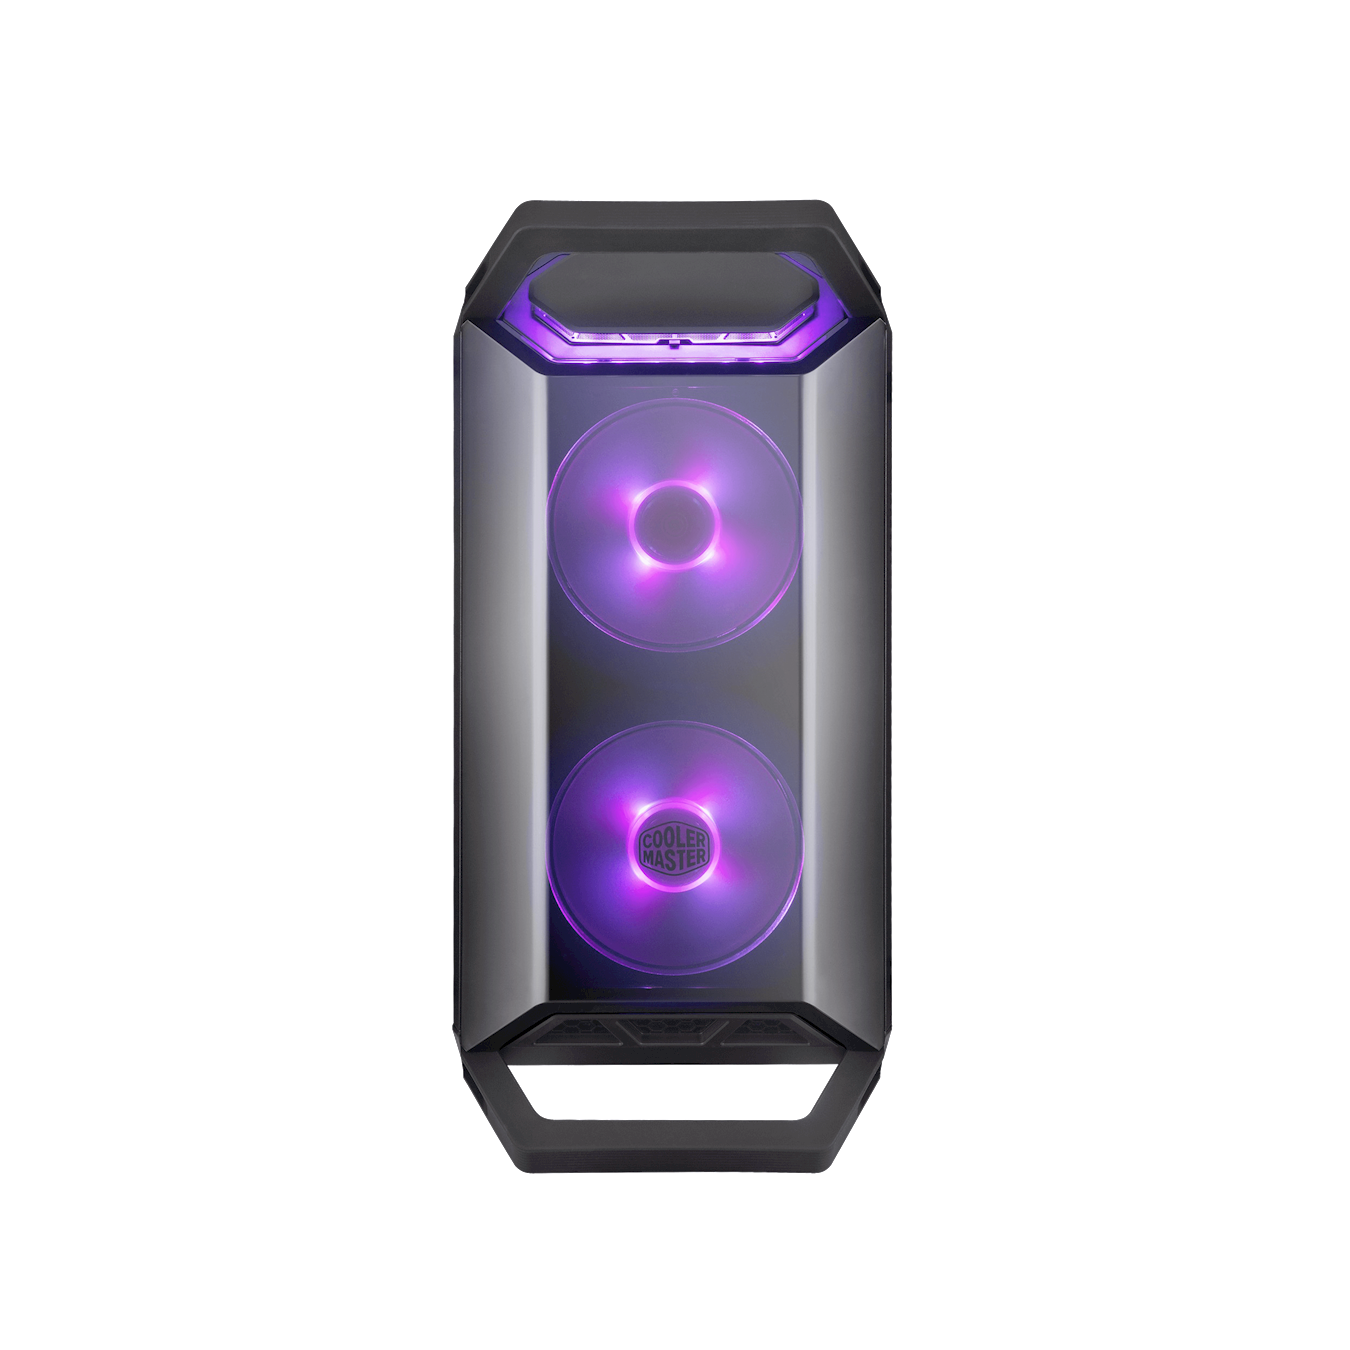 MasterBox Q300P Mini Tower Case - Two pre-installed 120mm RGB LED fans behind the front panel and RGB lighting at the top front can create an amazing lighting effect.